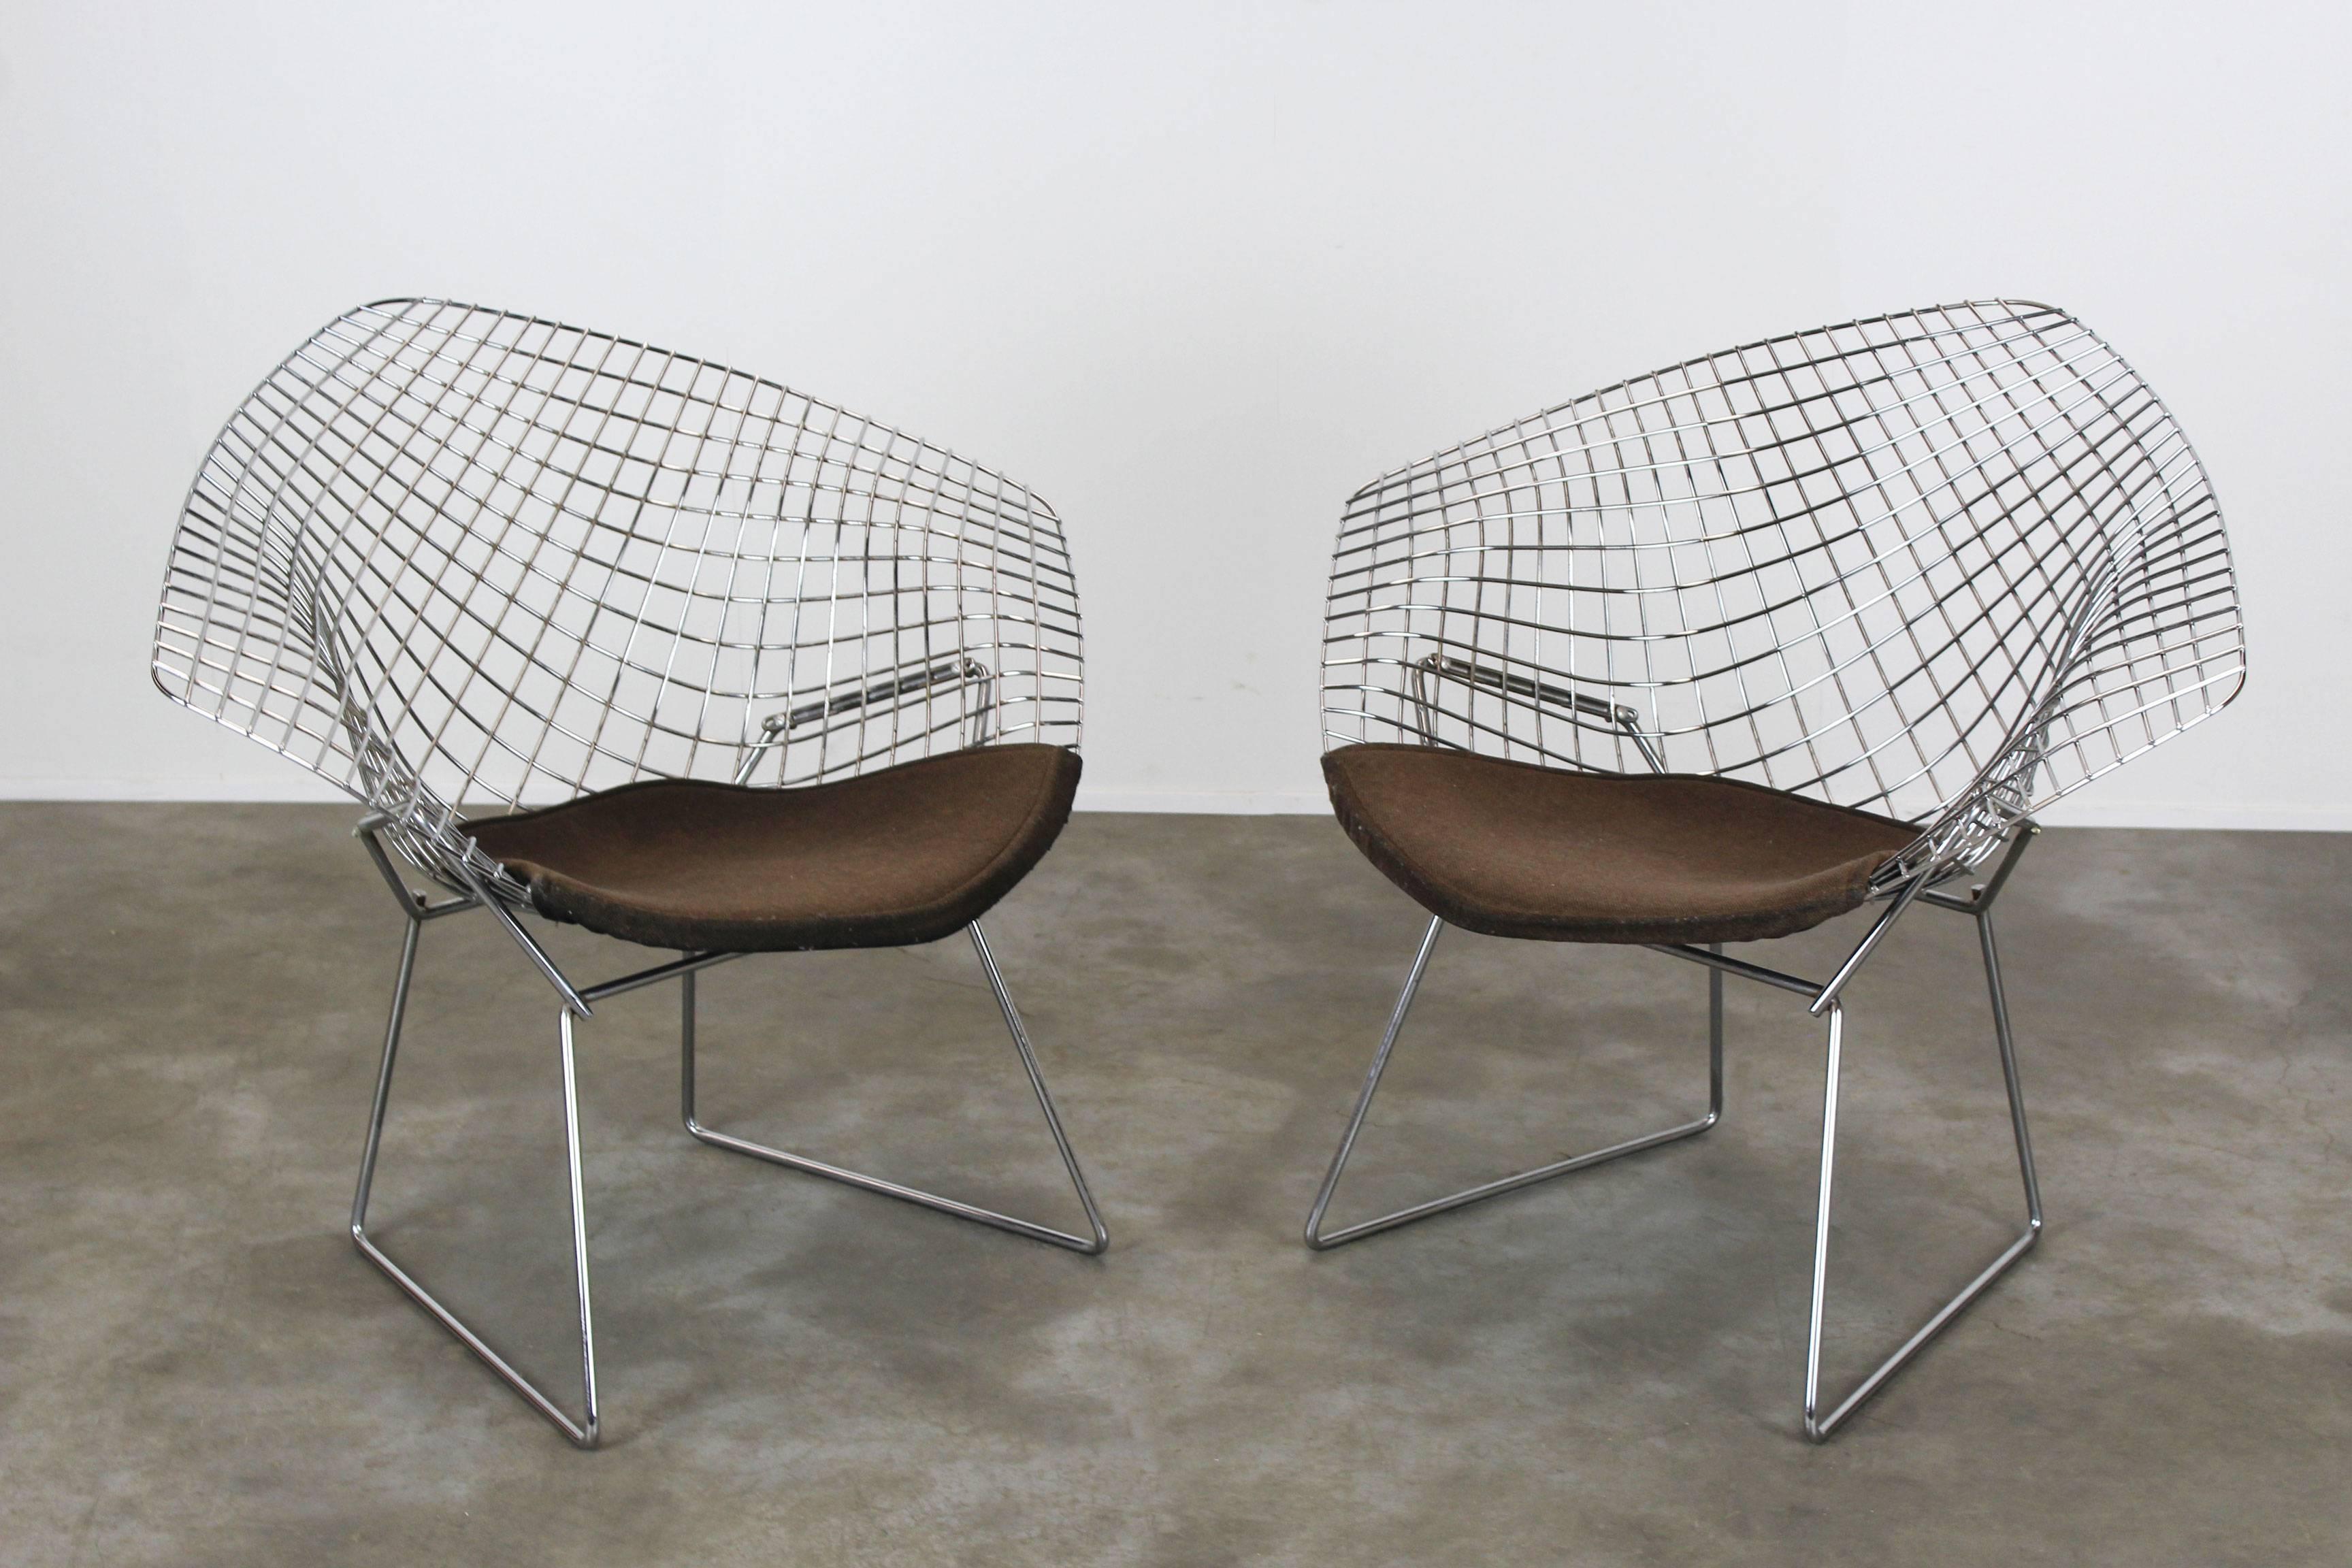 Late 20th Century Set of Two Chrome Diamond Chairs by Harry Bertoia for Knoll, 1970, Grey